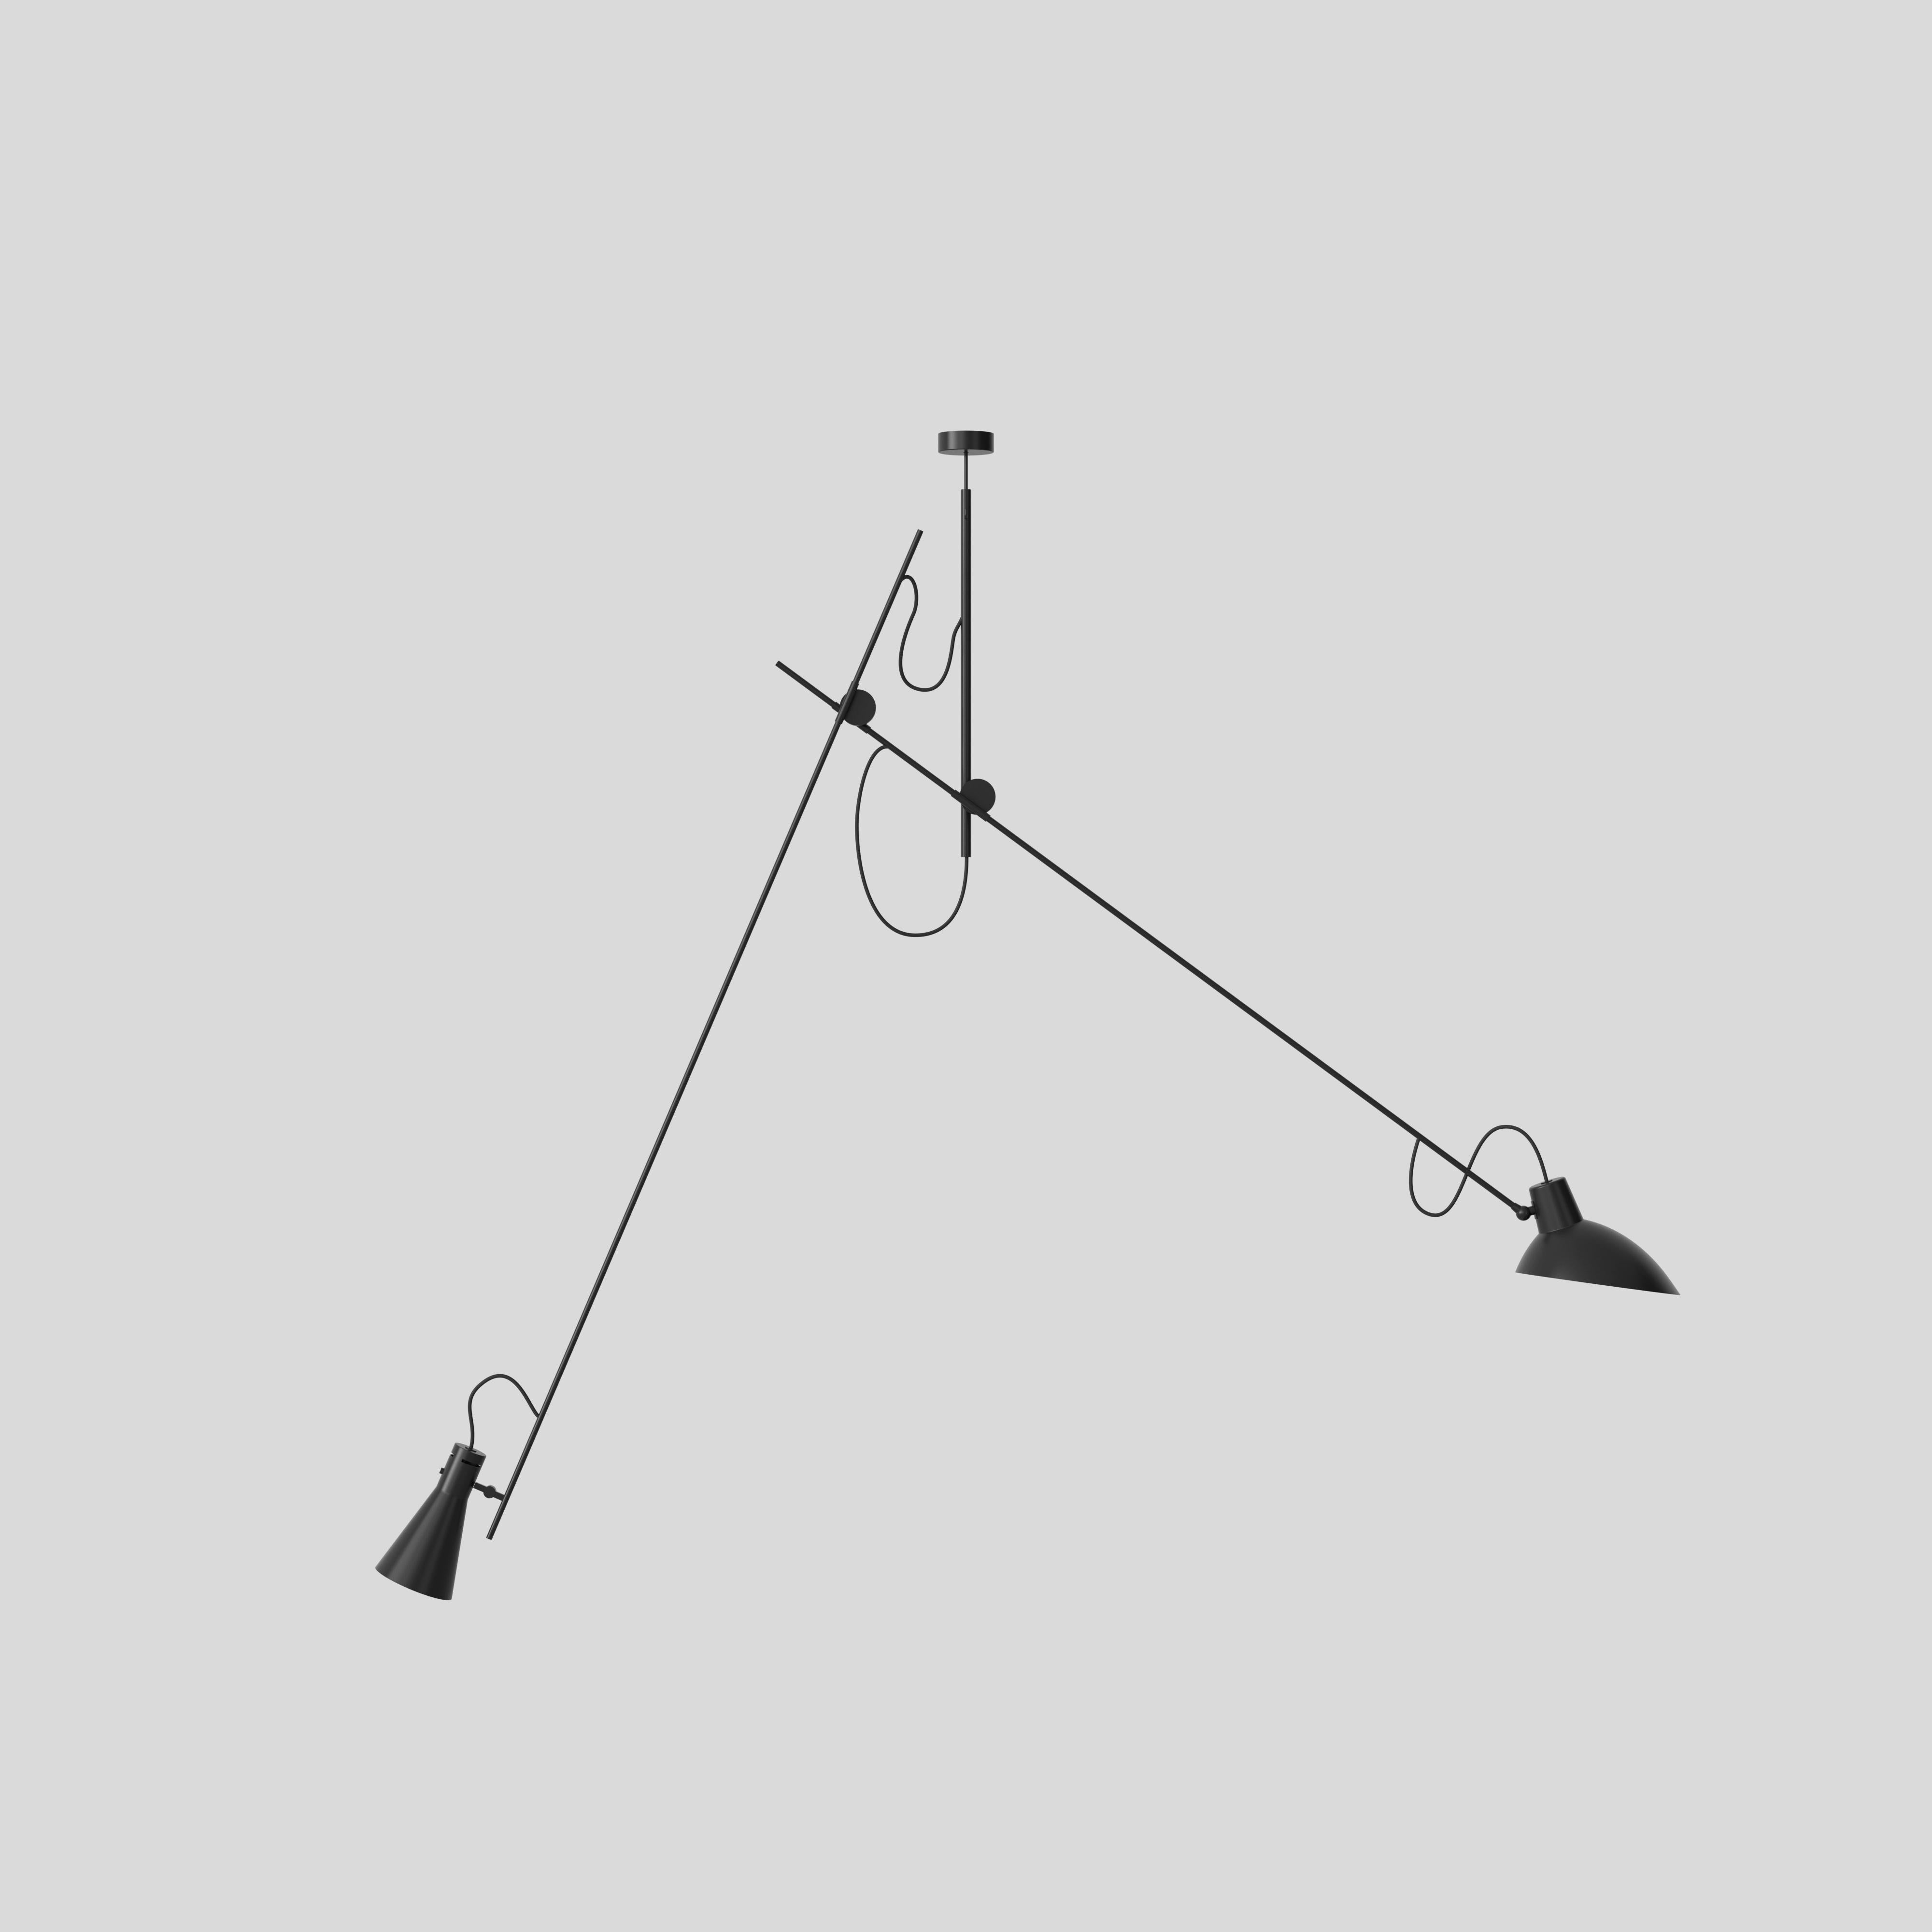 VV Cinquanta suspension lamp
Design by Vittoriano Viganò
This version is with black lacquered reflectors and black frame.

The VV Cinquanta suspension is elegant and versatile with two posable direct light sources.

With a distinctive